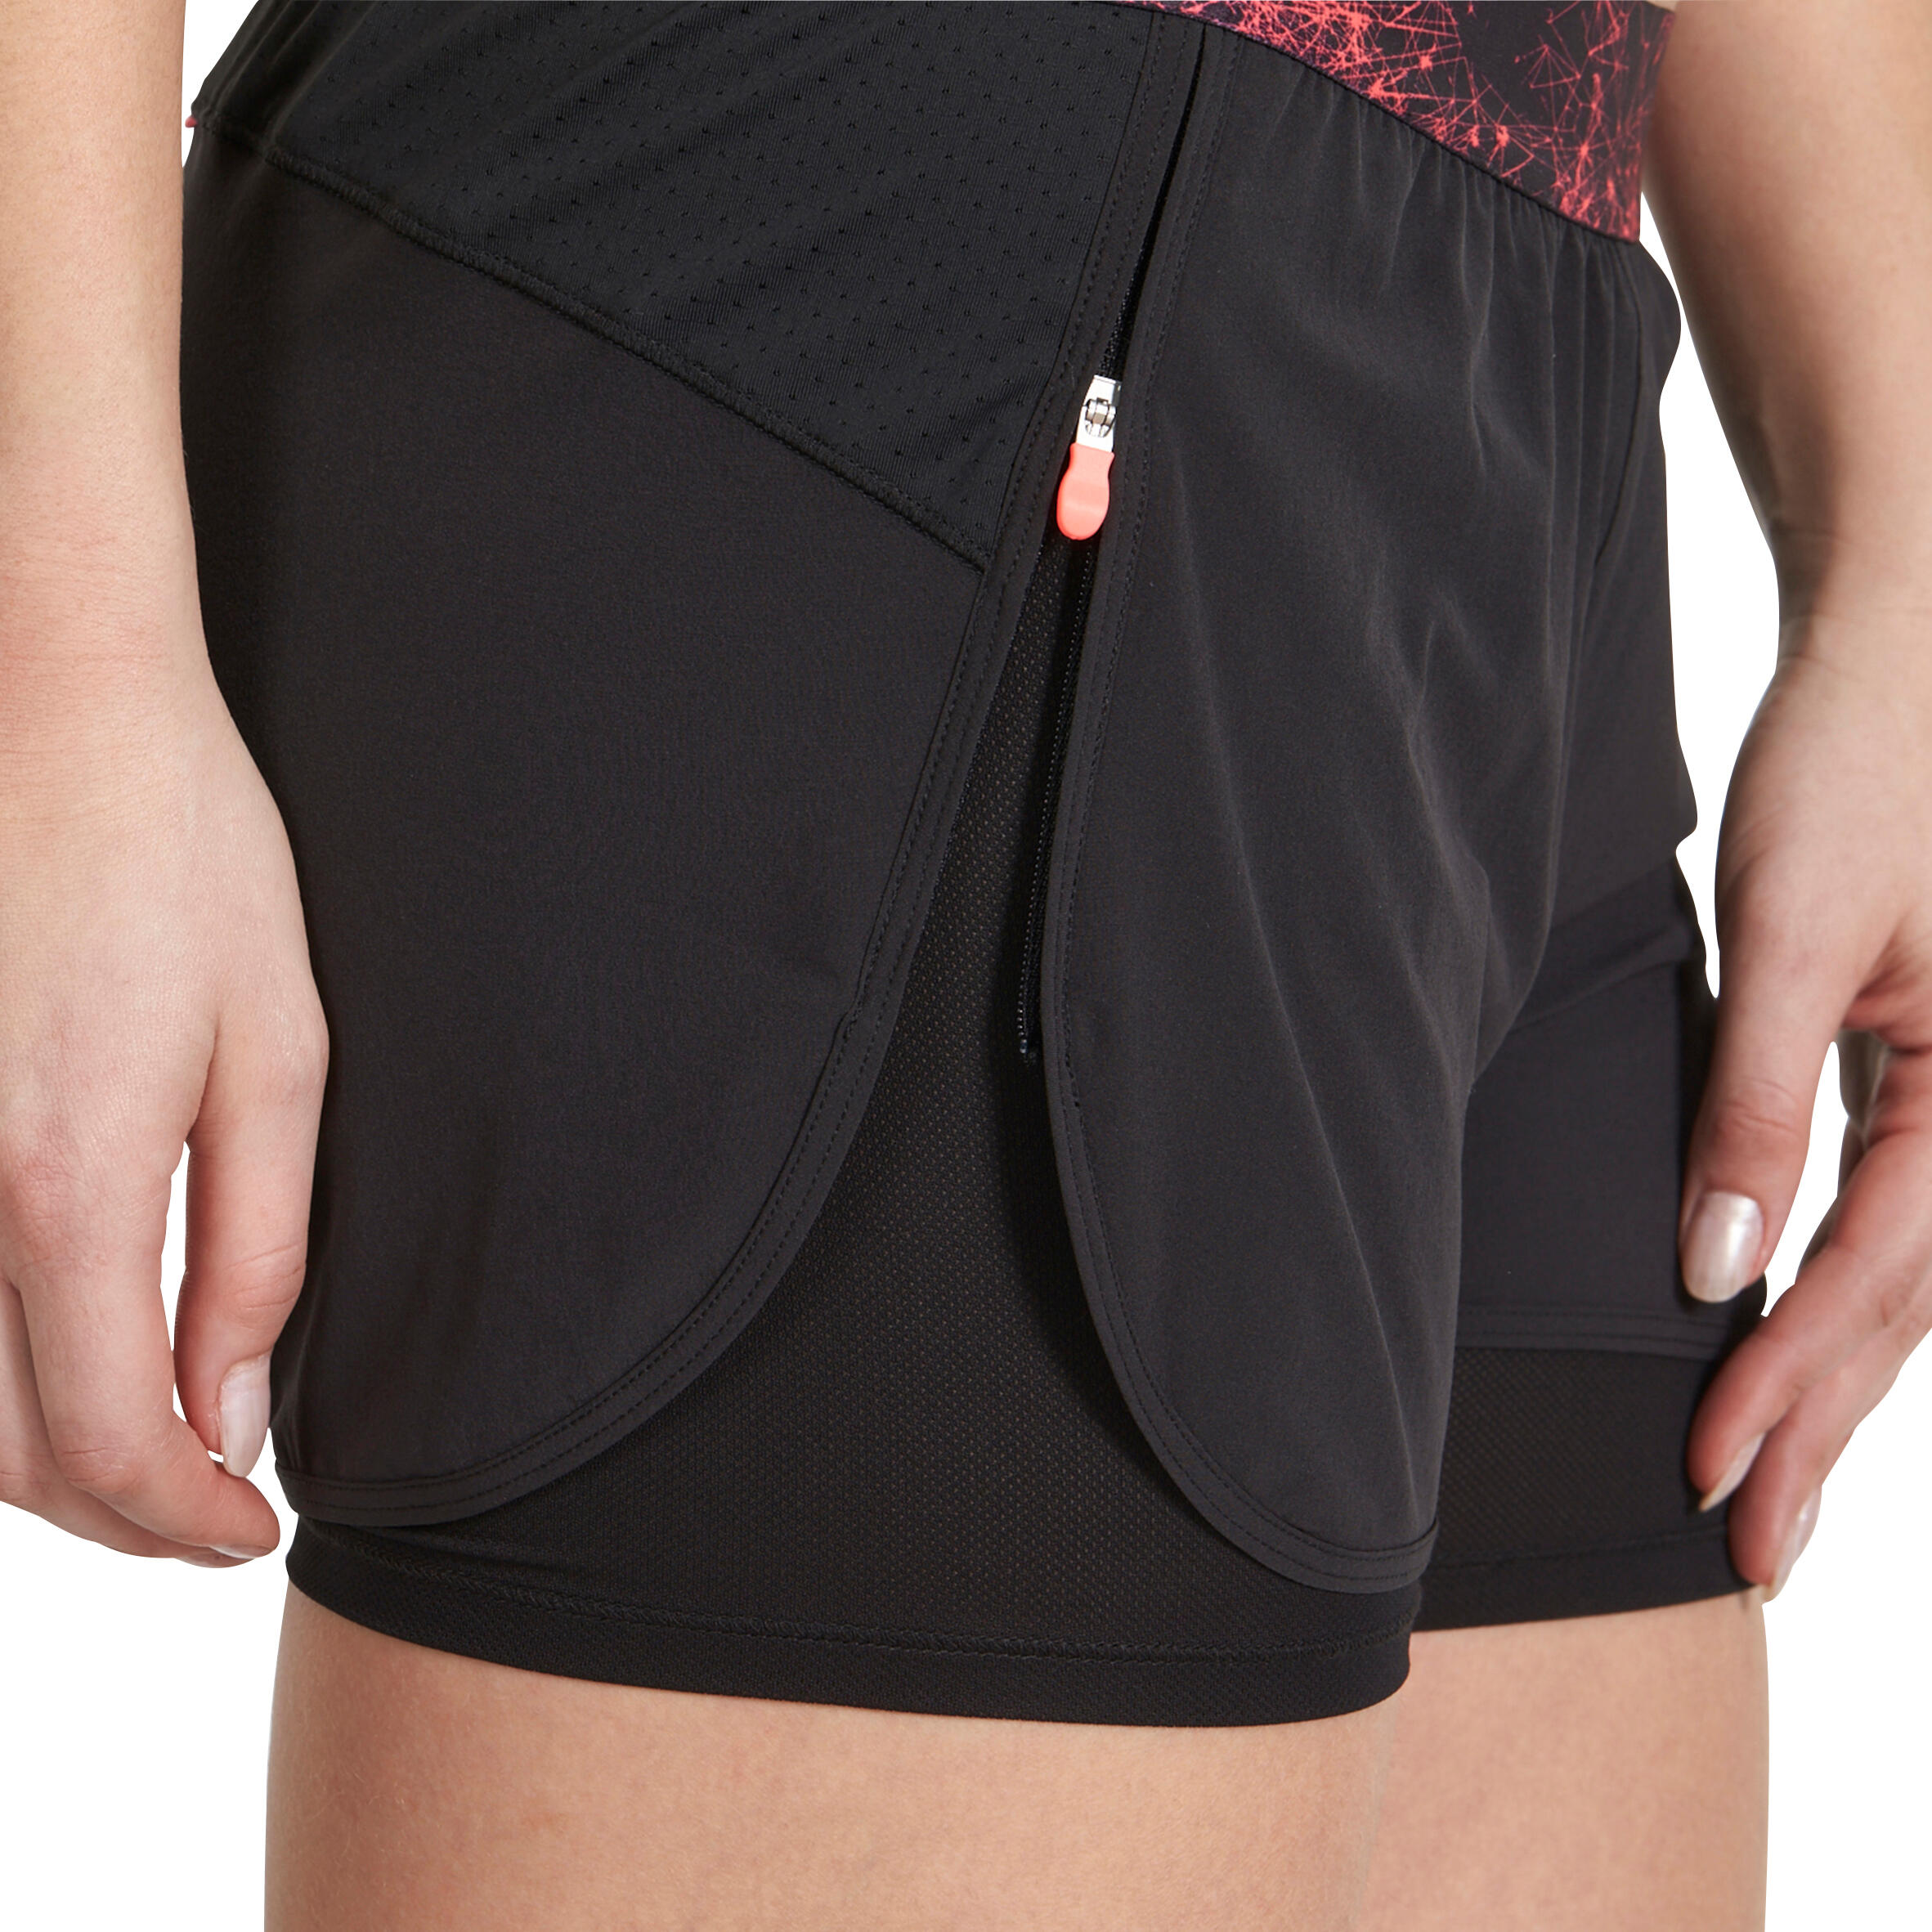 Energy Xtreme Women's 2-in-1 Fitness Shorts - Black/Printed Waistband 9/13